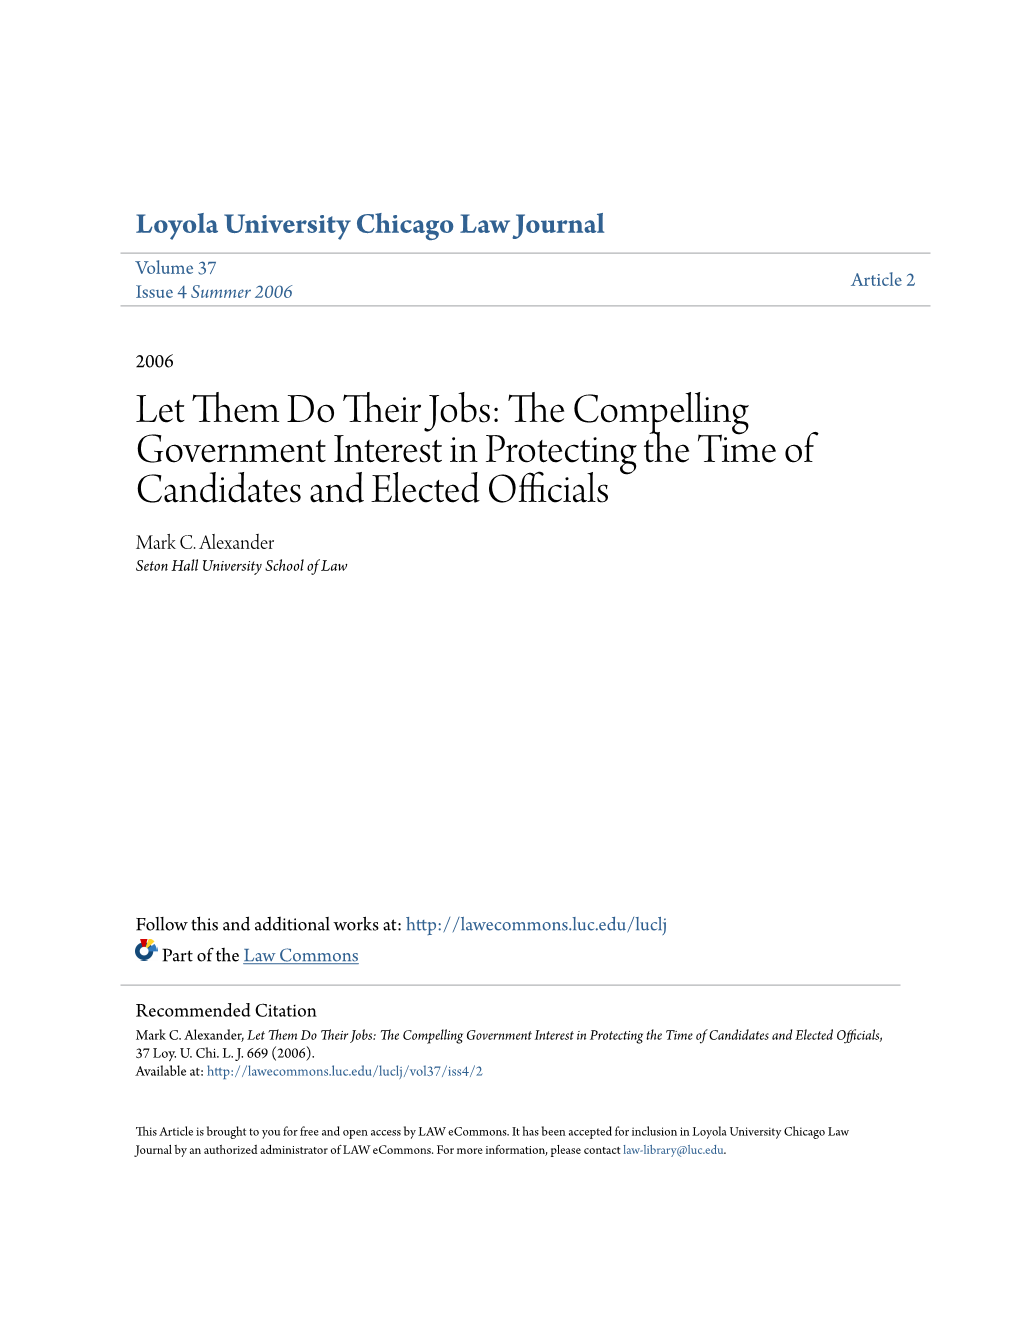 The Compelling Government Interest in Protecting the Time of Candidates and Elected Officials, 37 Loy